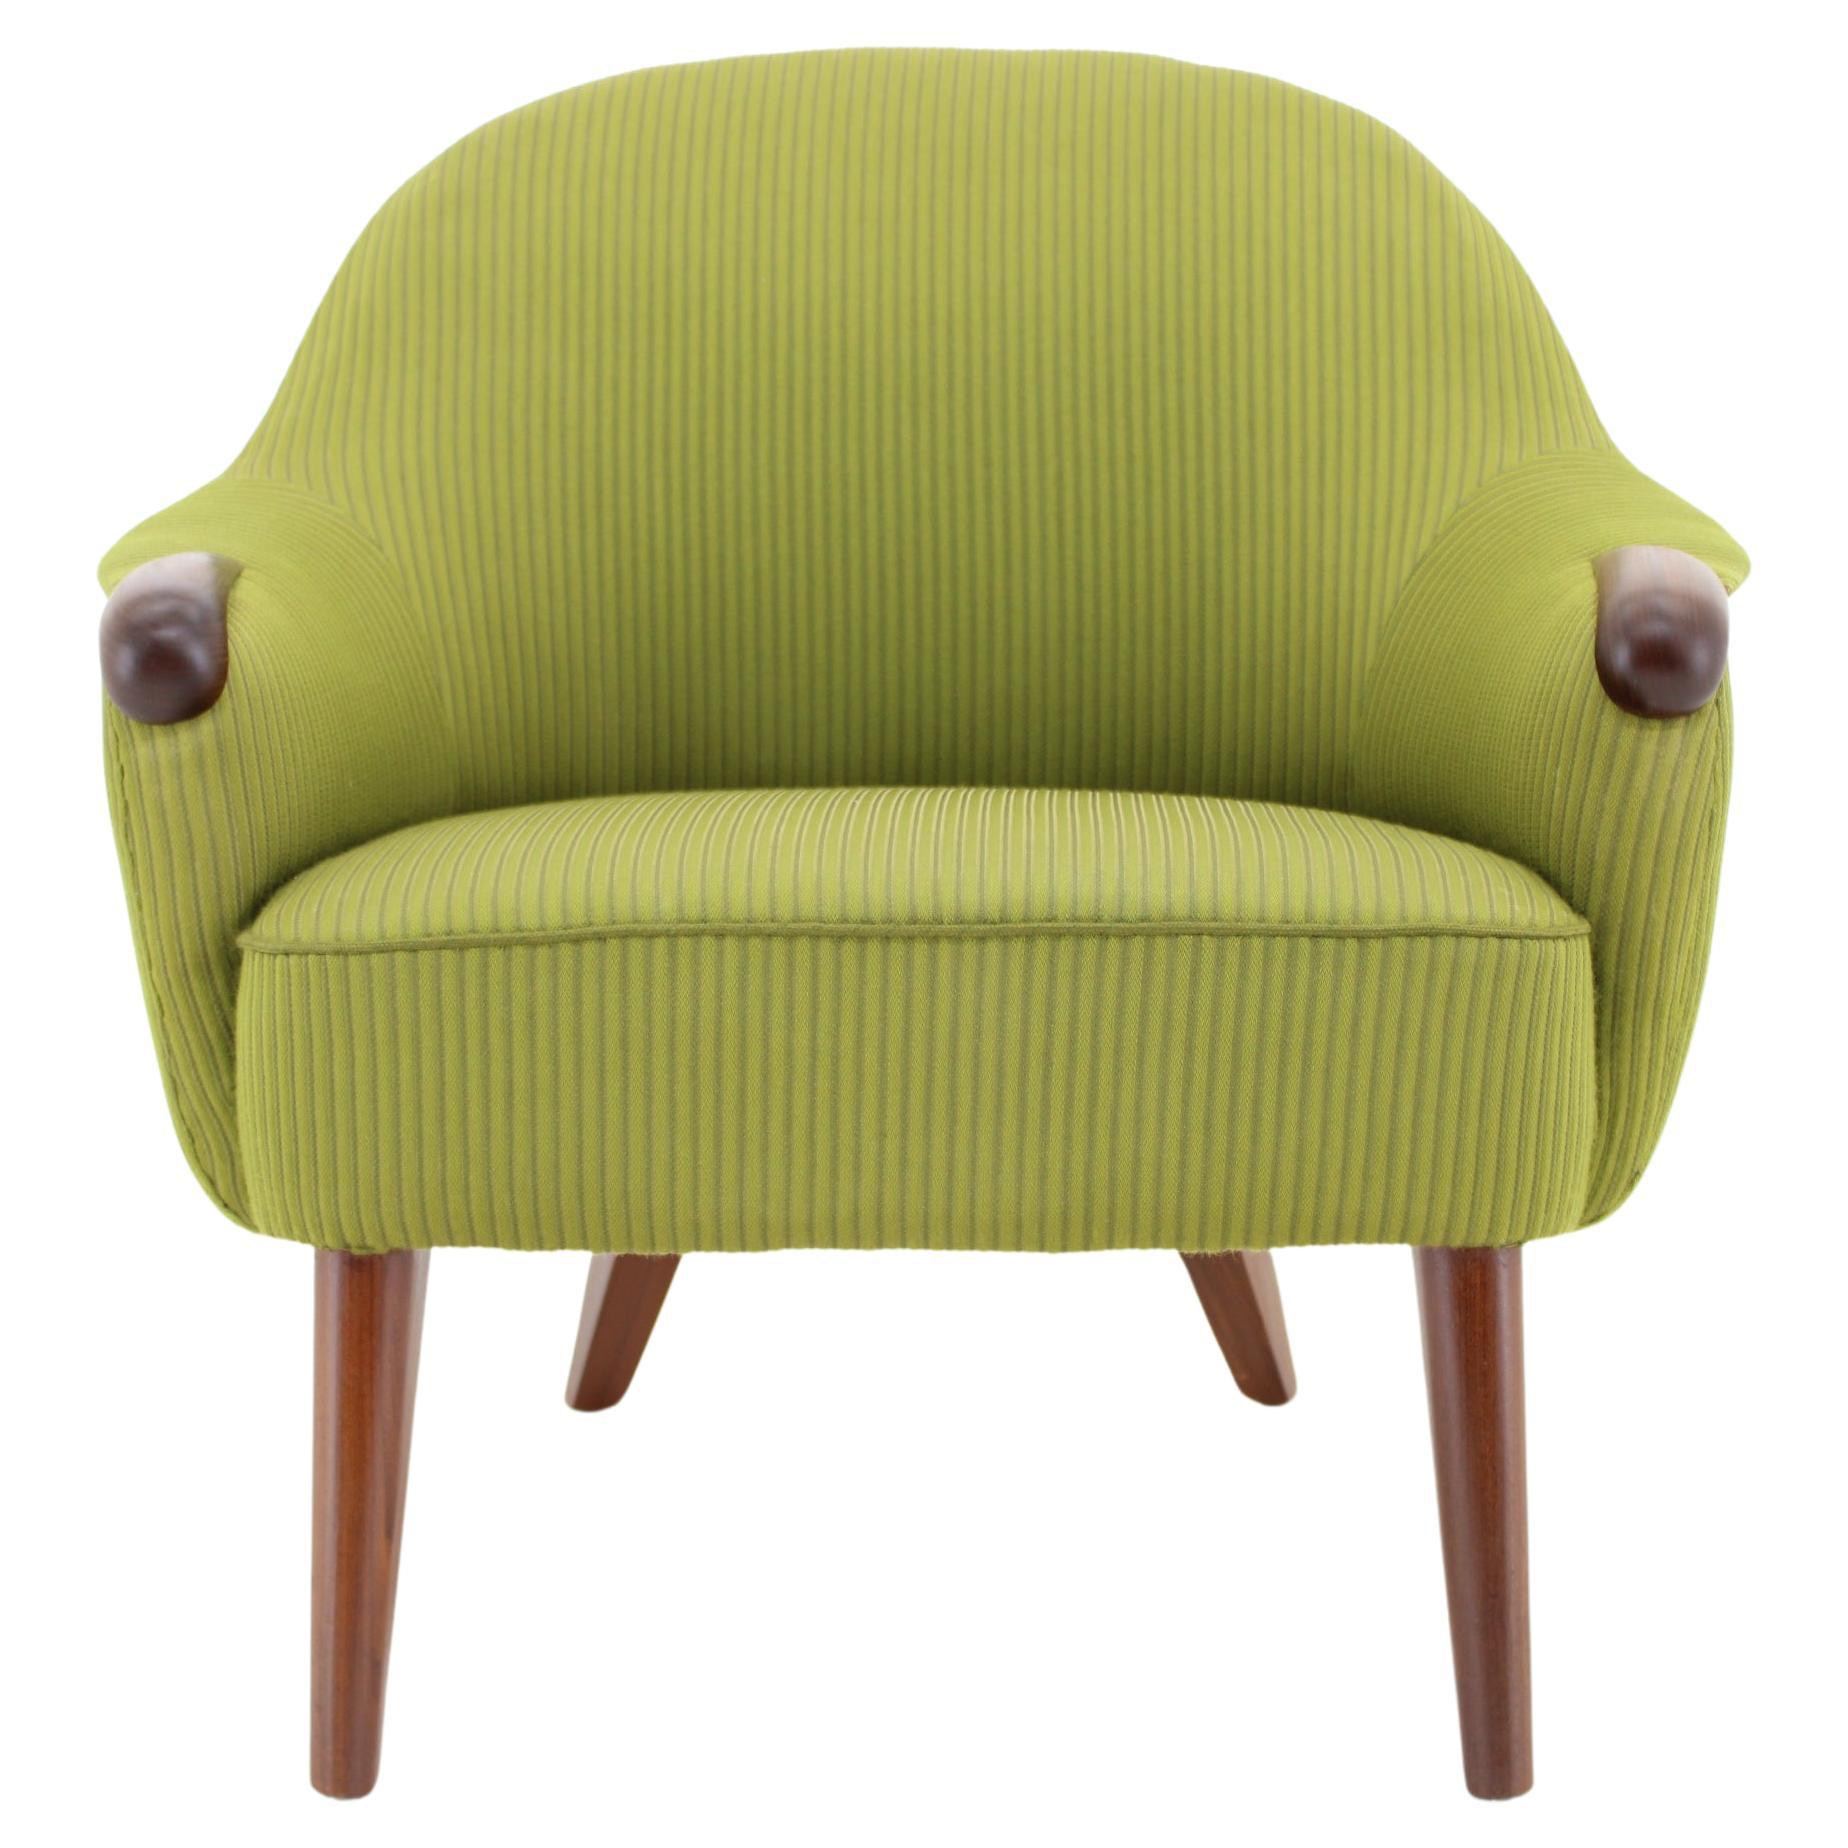 1960s Danish Lounge Chair For Sale